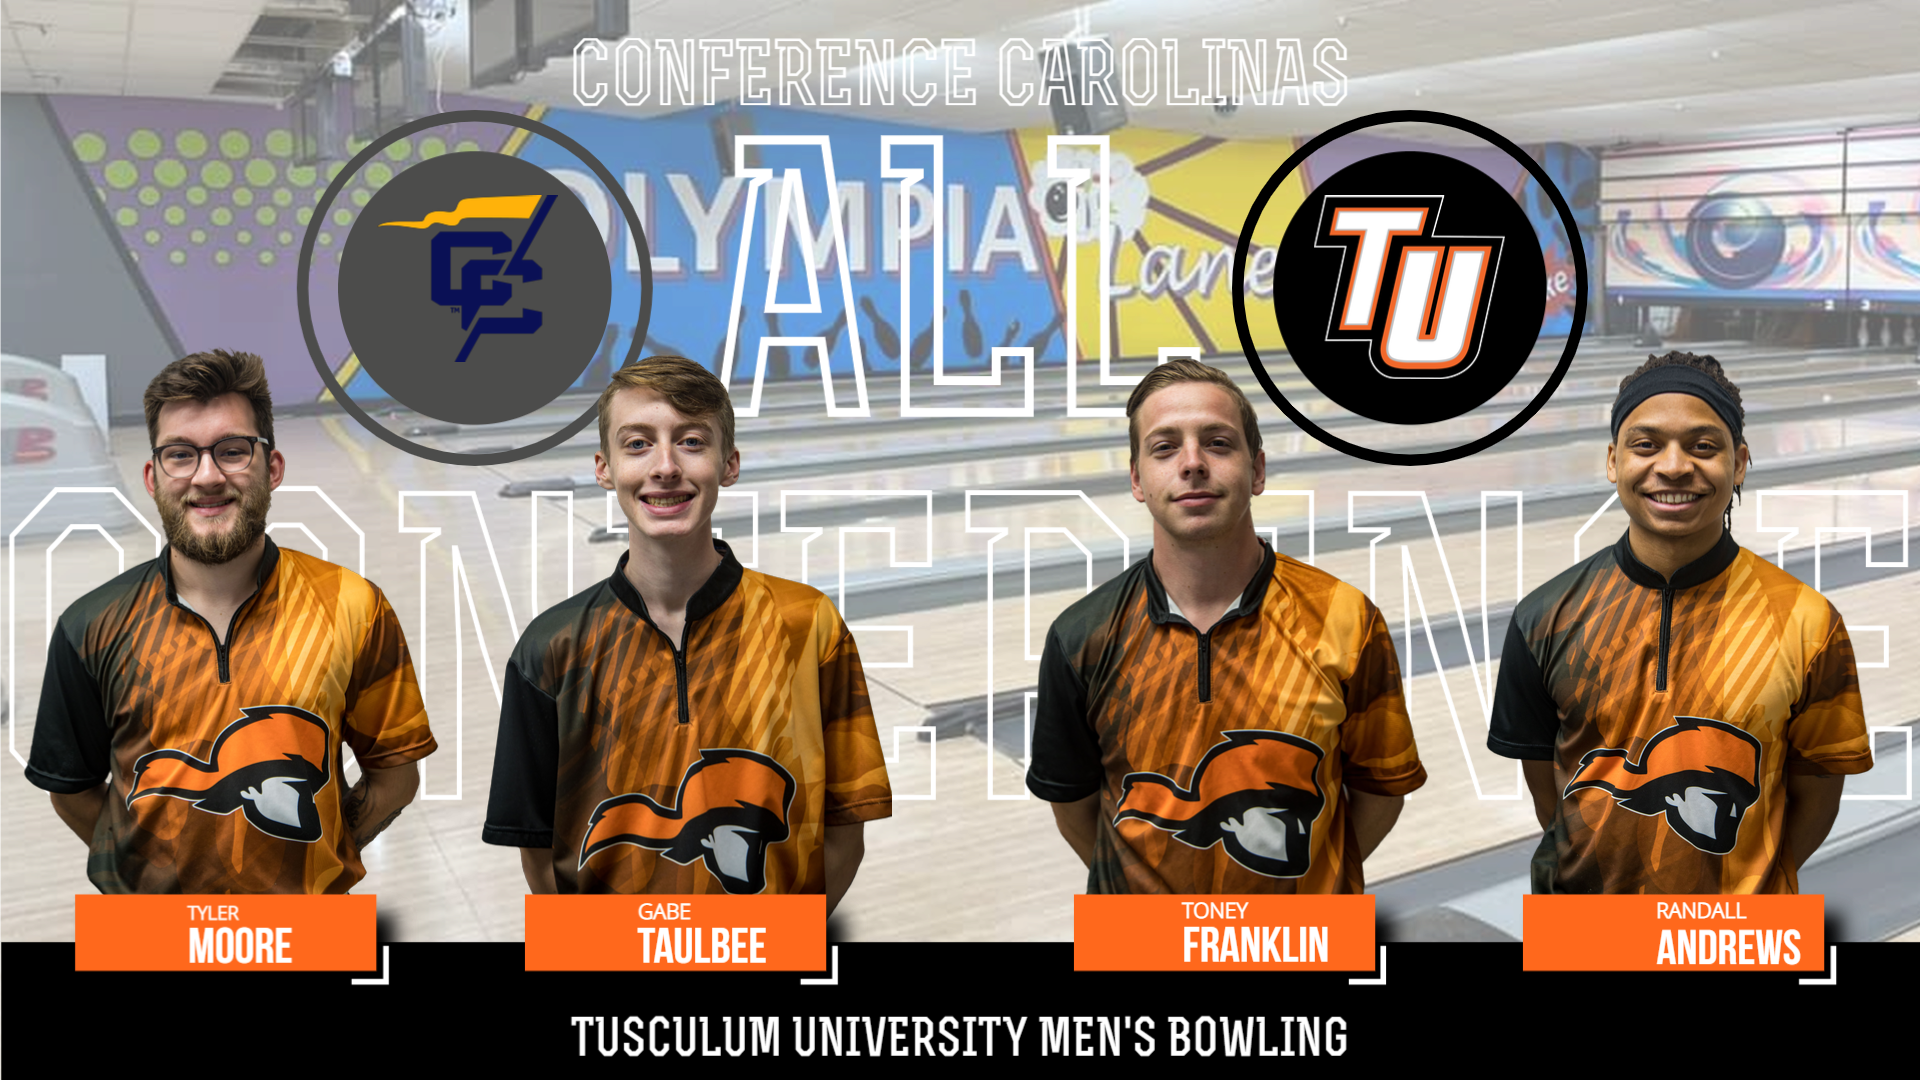 Four Pioneers earn Conference Carolinas men's bowling honors